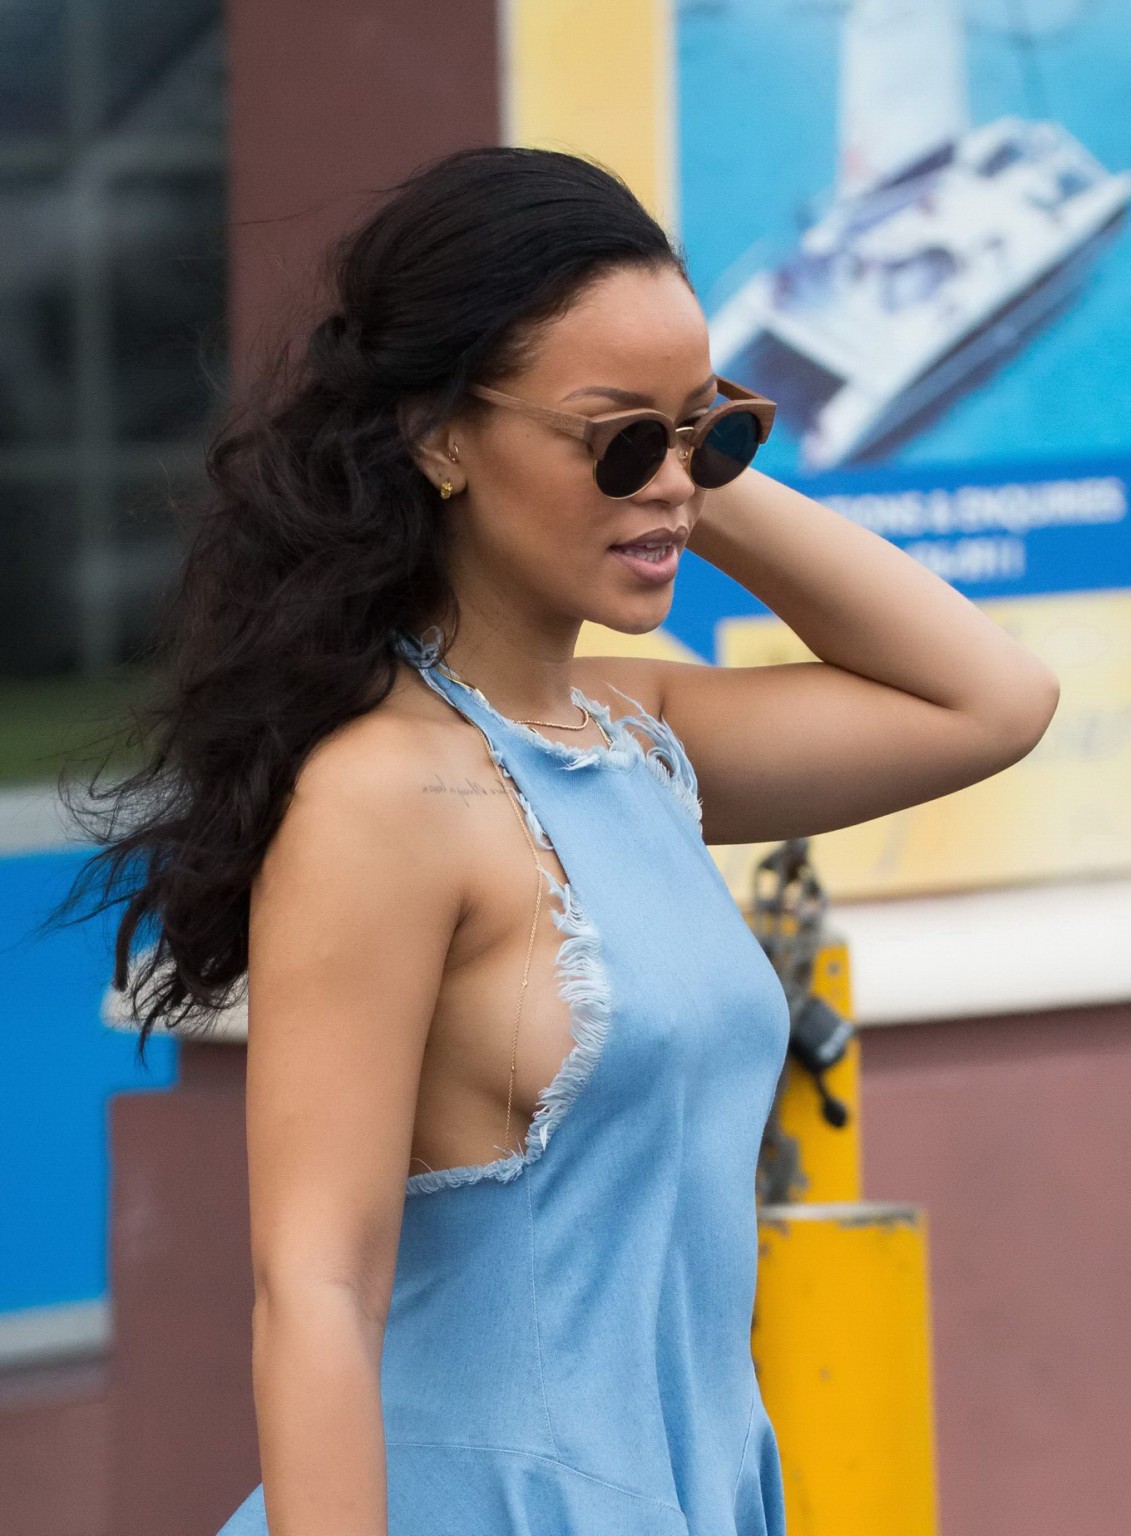 Rihanna showing sideboob and pokies in tiny blue dress #75148327